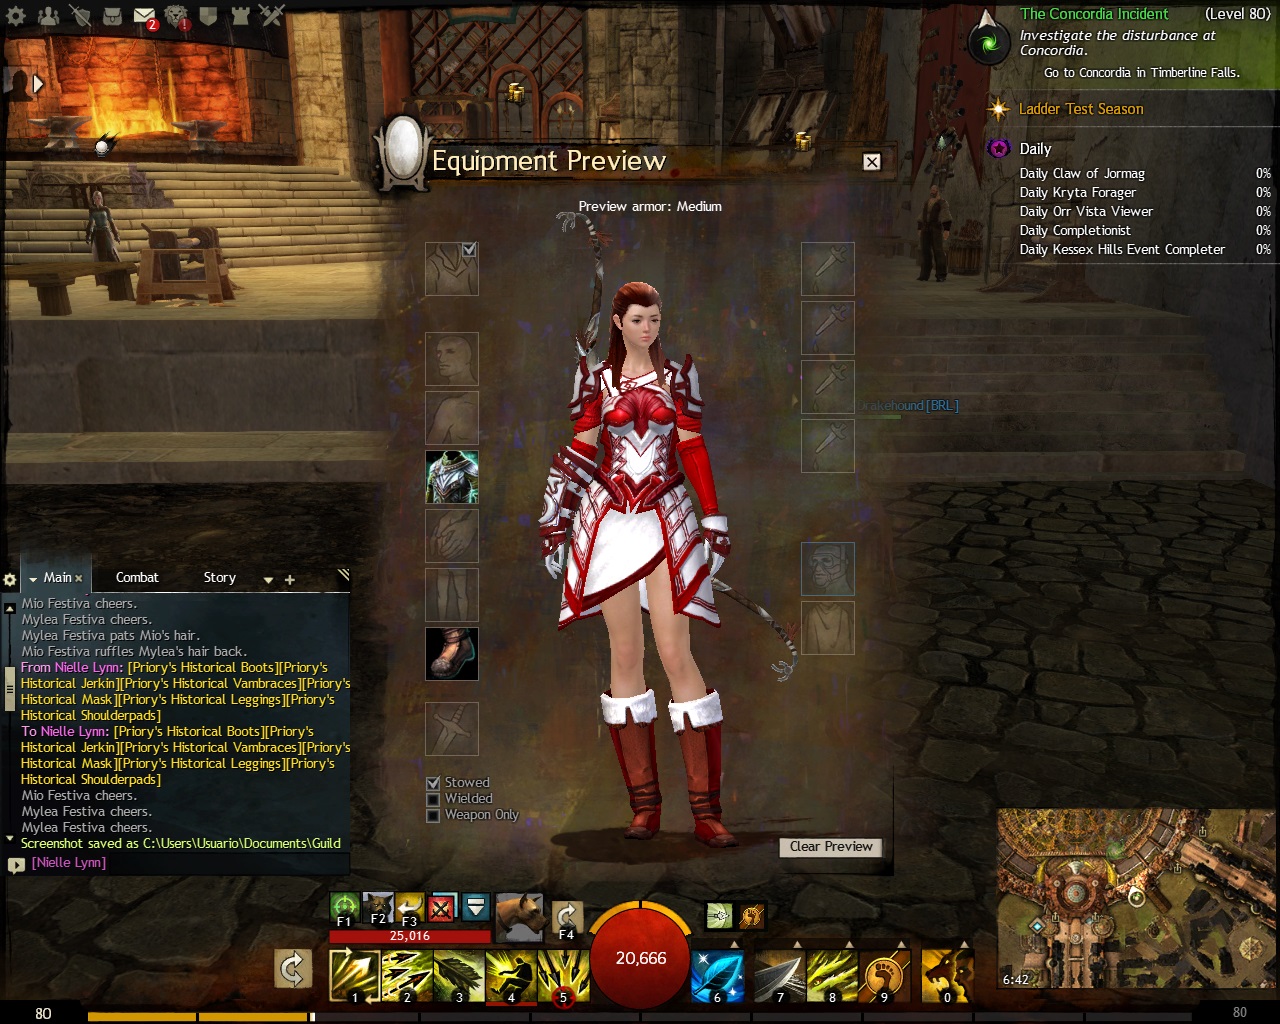 Guild Wars 2 - Priorys Historical Jerkin with Seeker Boots - 01